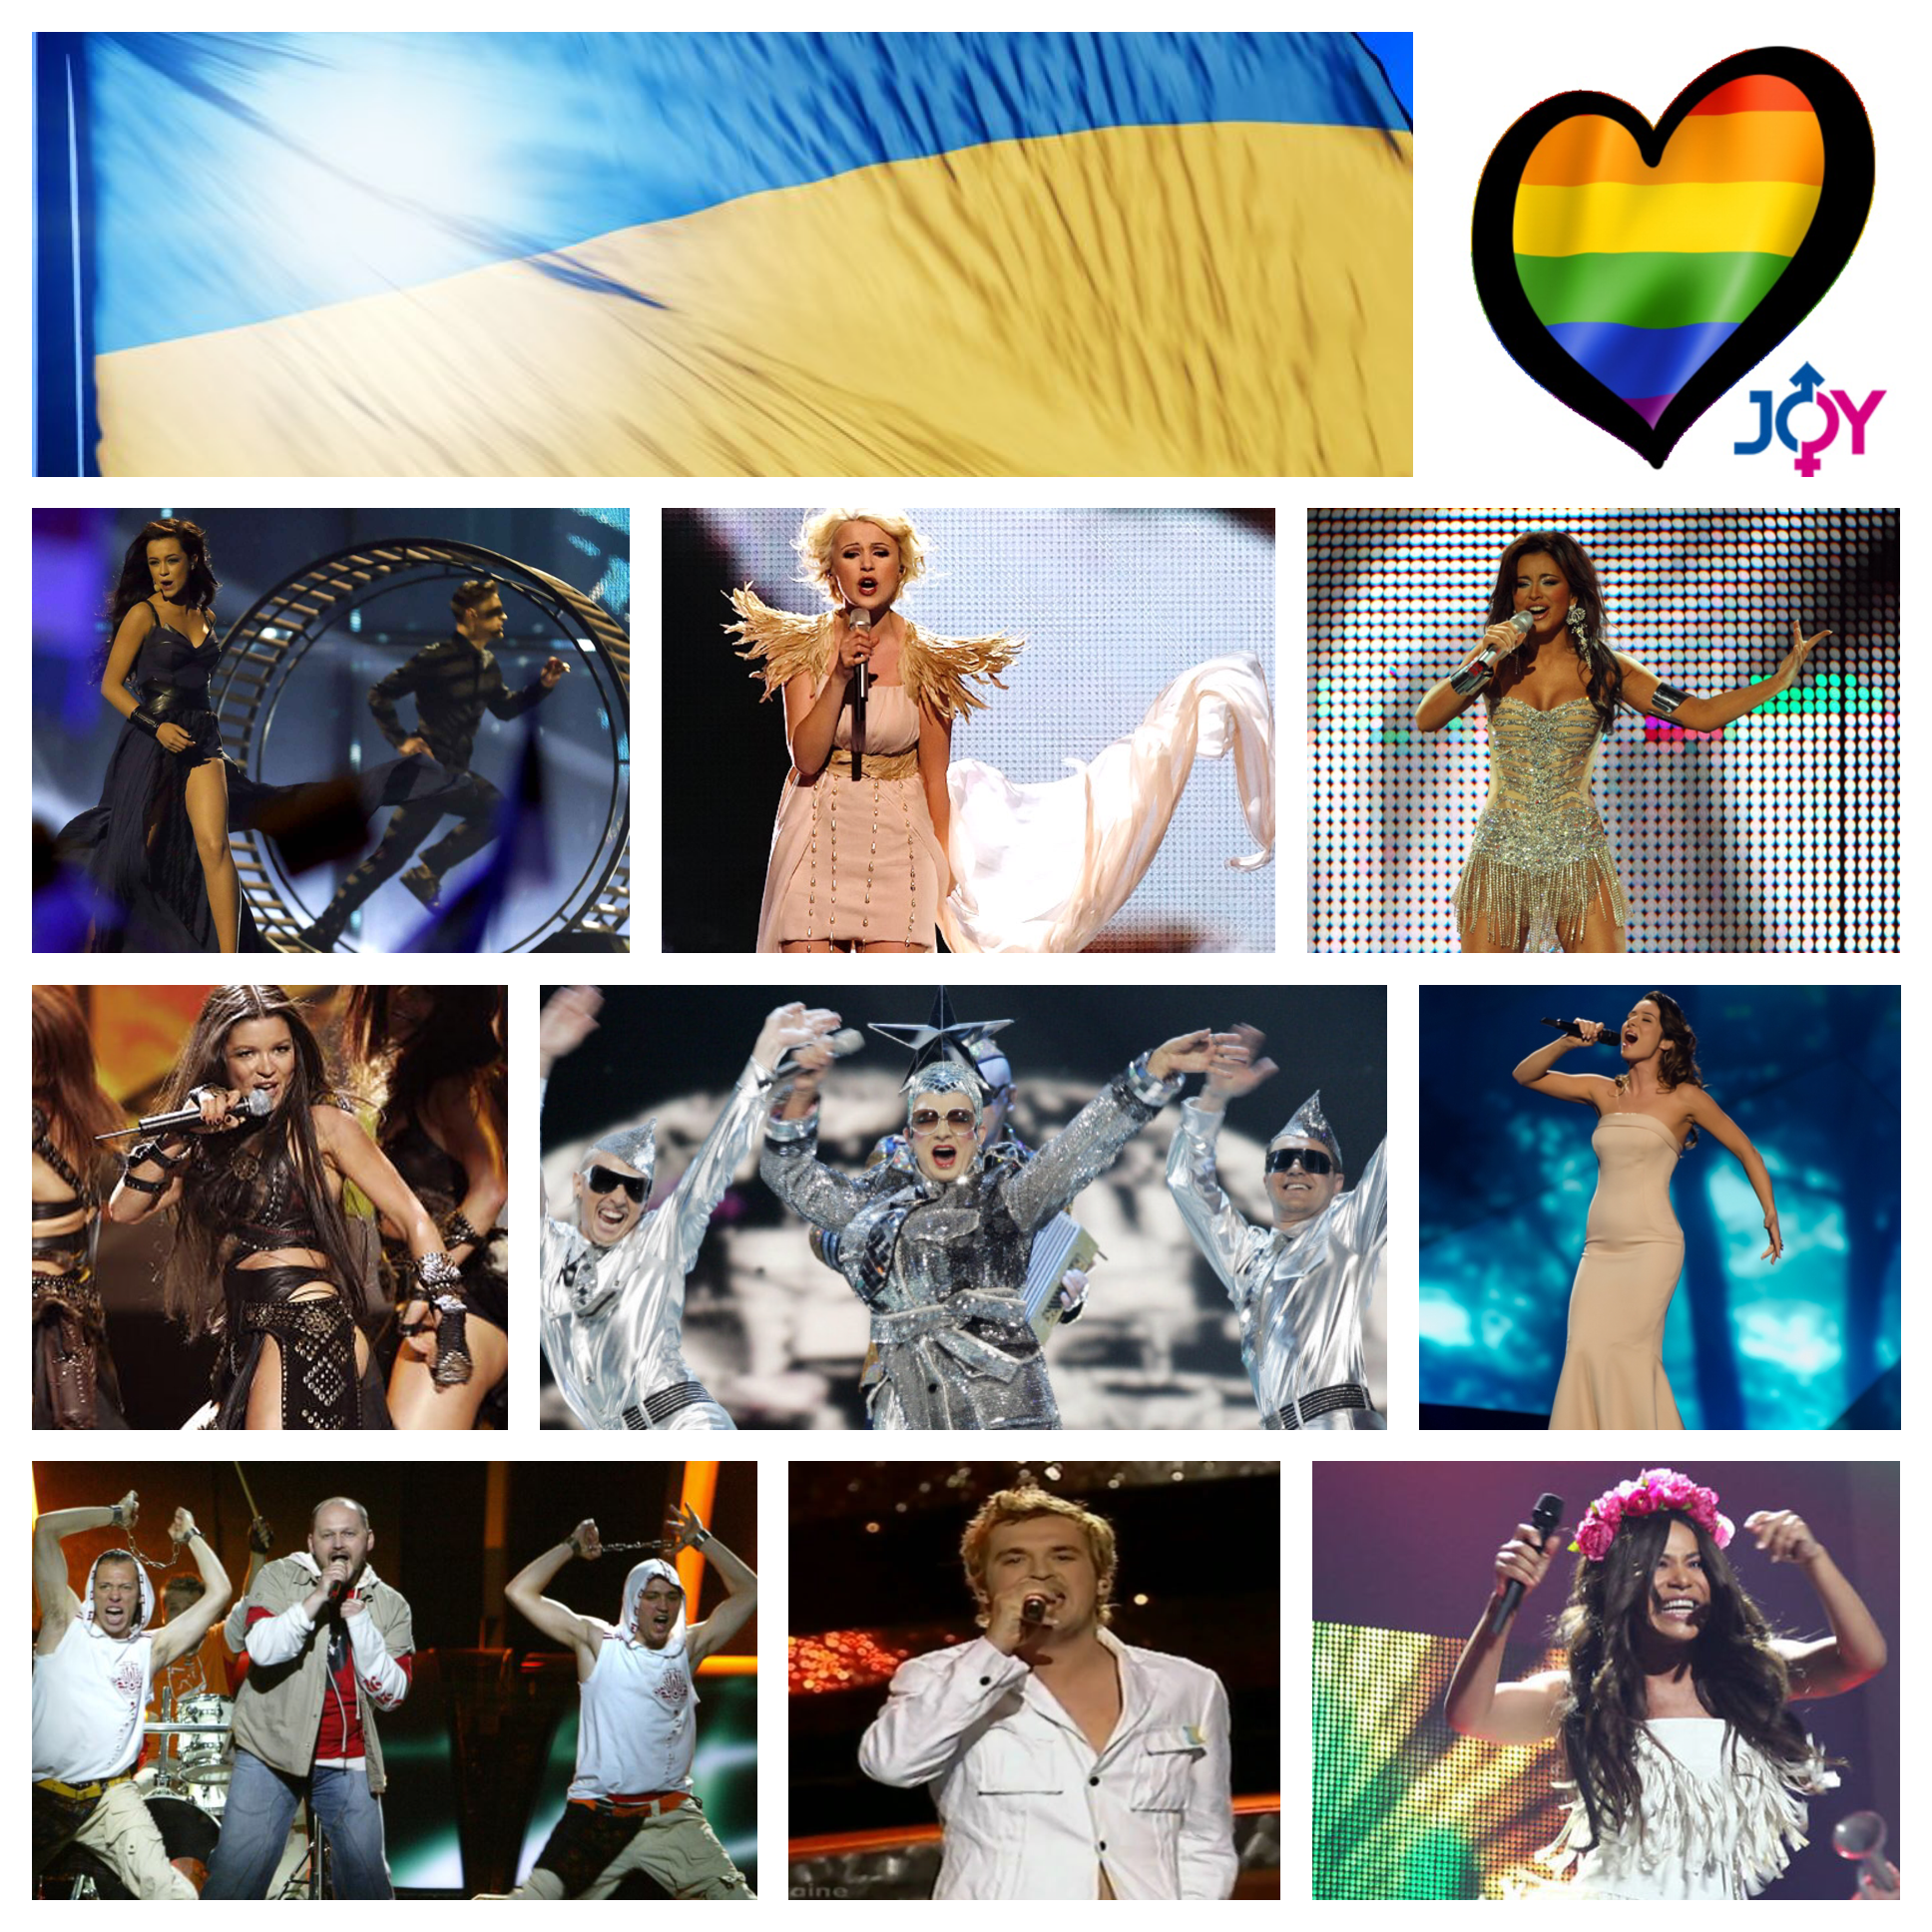 Flying the Blue and Yellow (and Orange): Ukraine at Eurovision